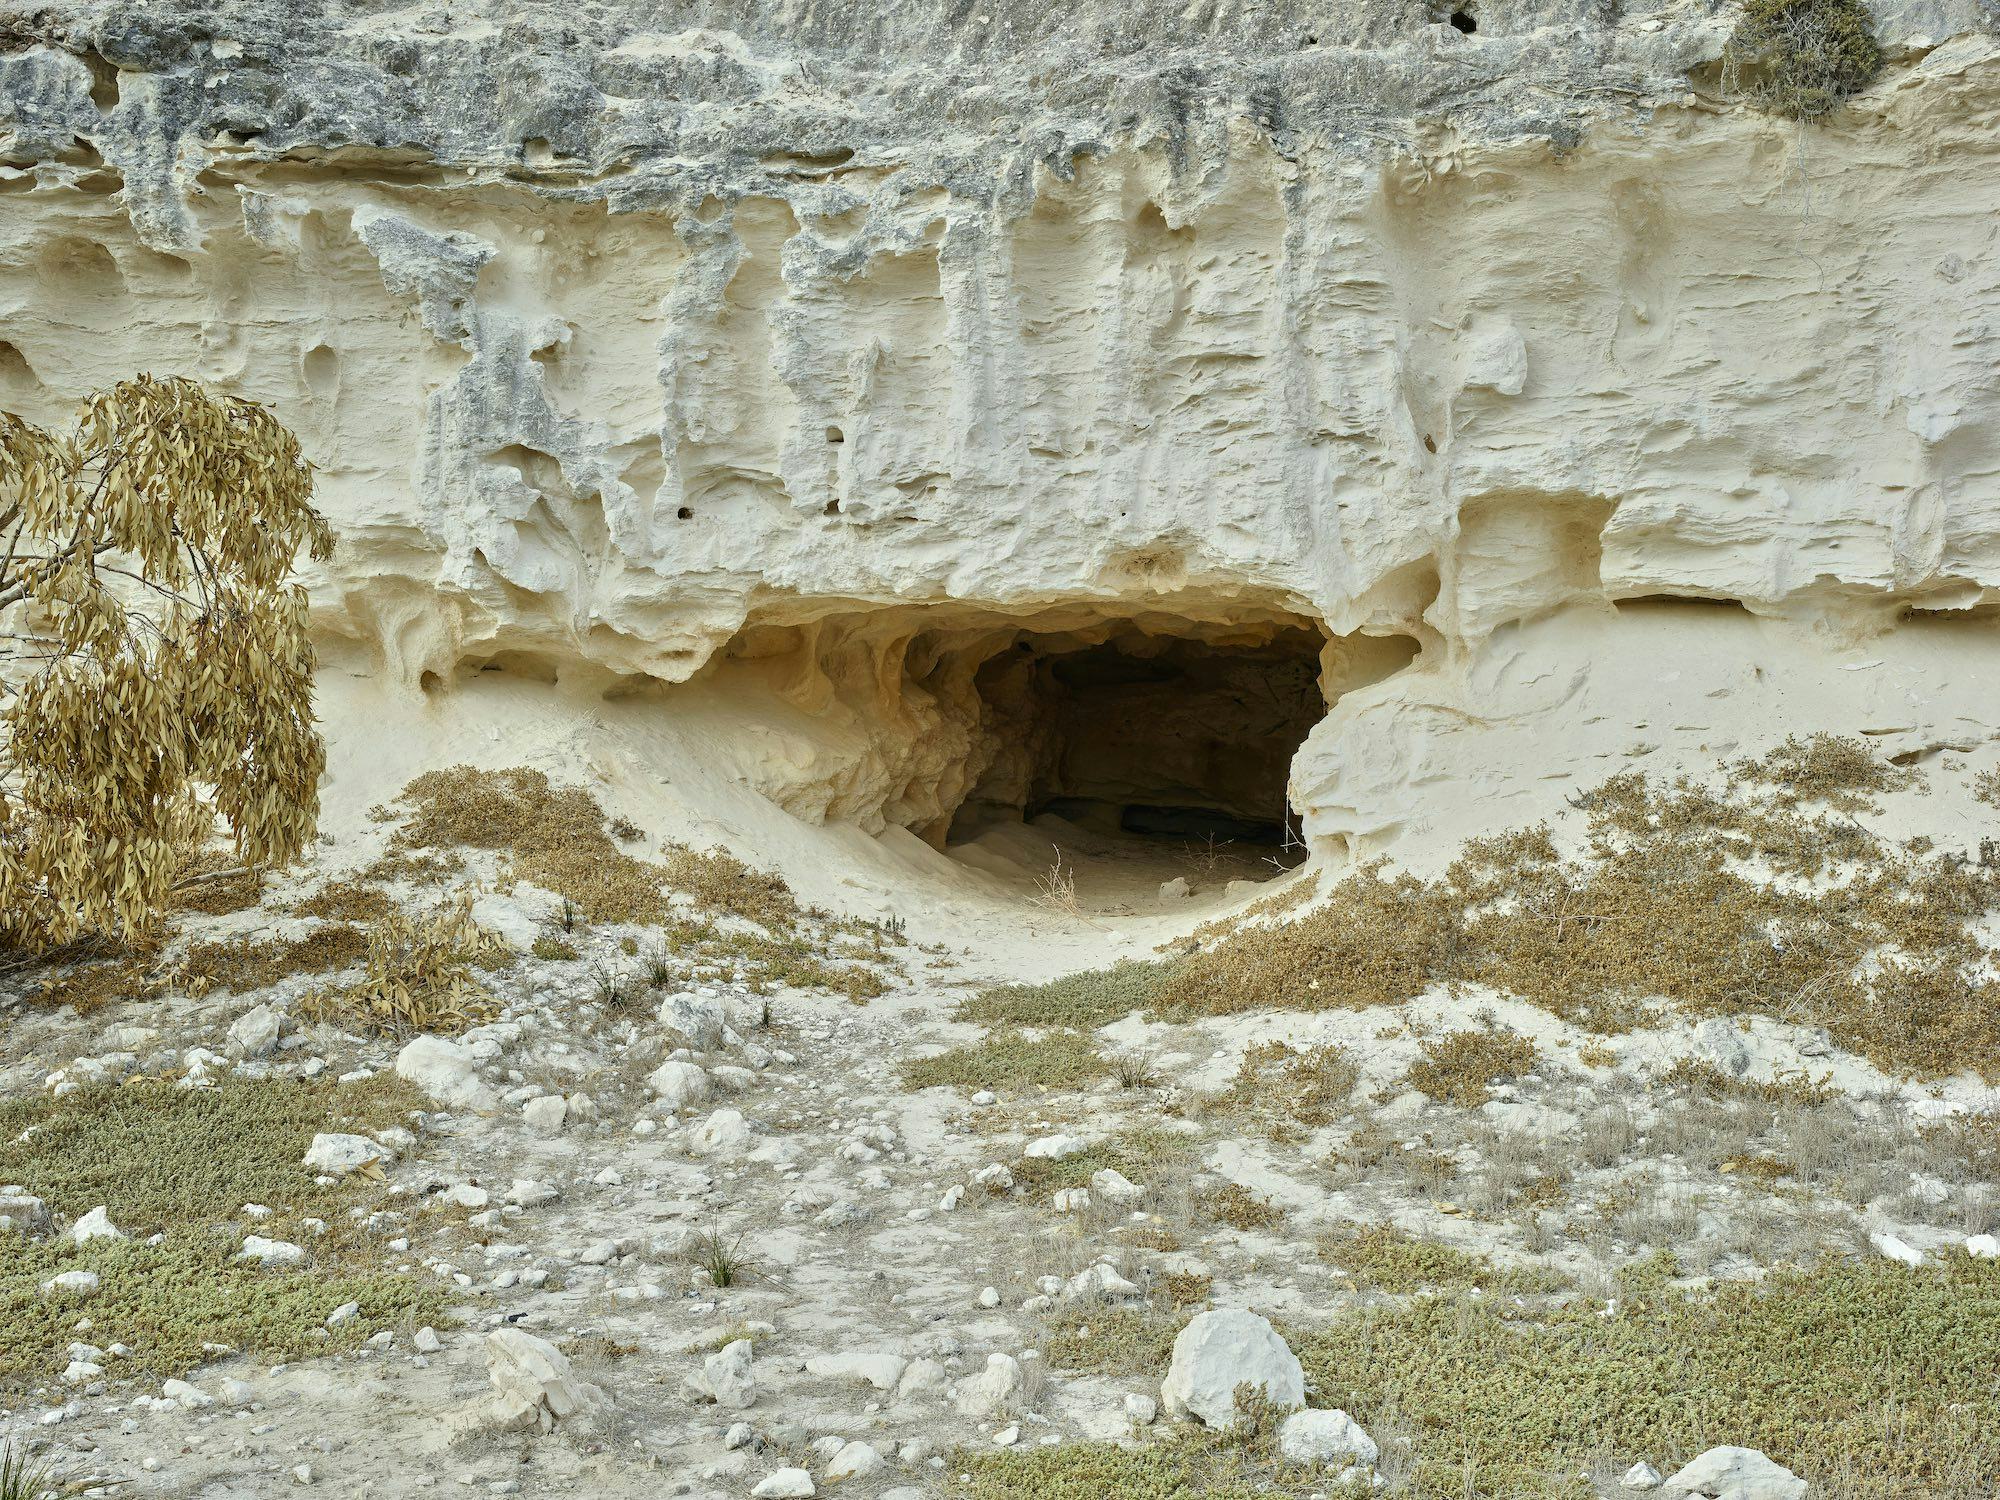 Photograph of the entrance of a cave on Robben Island © Thero Makepe